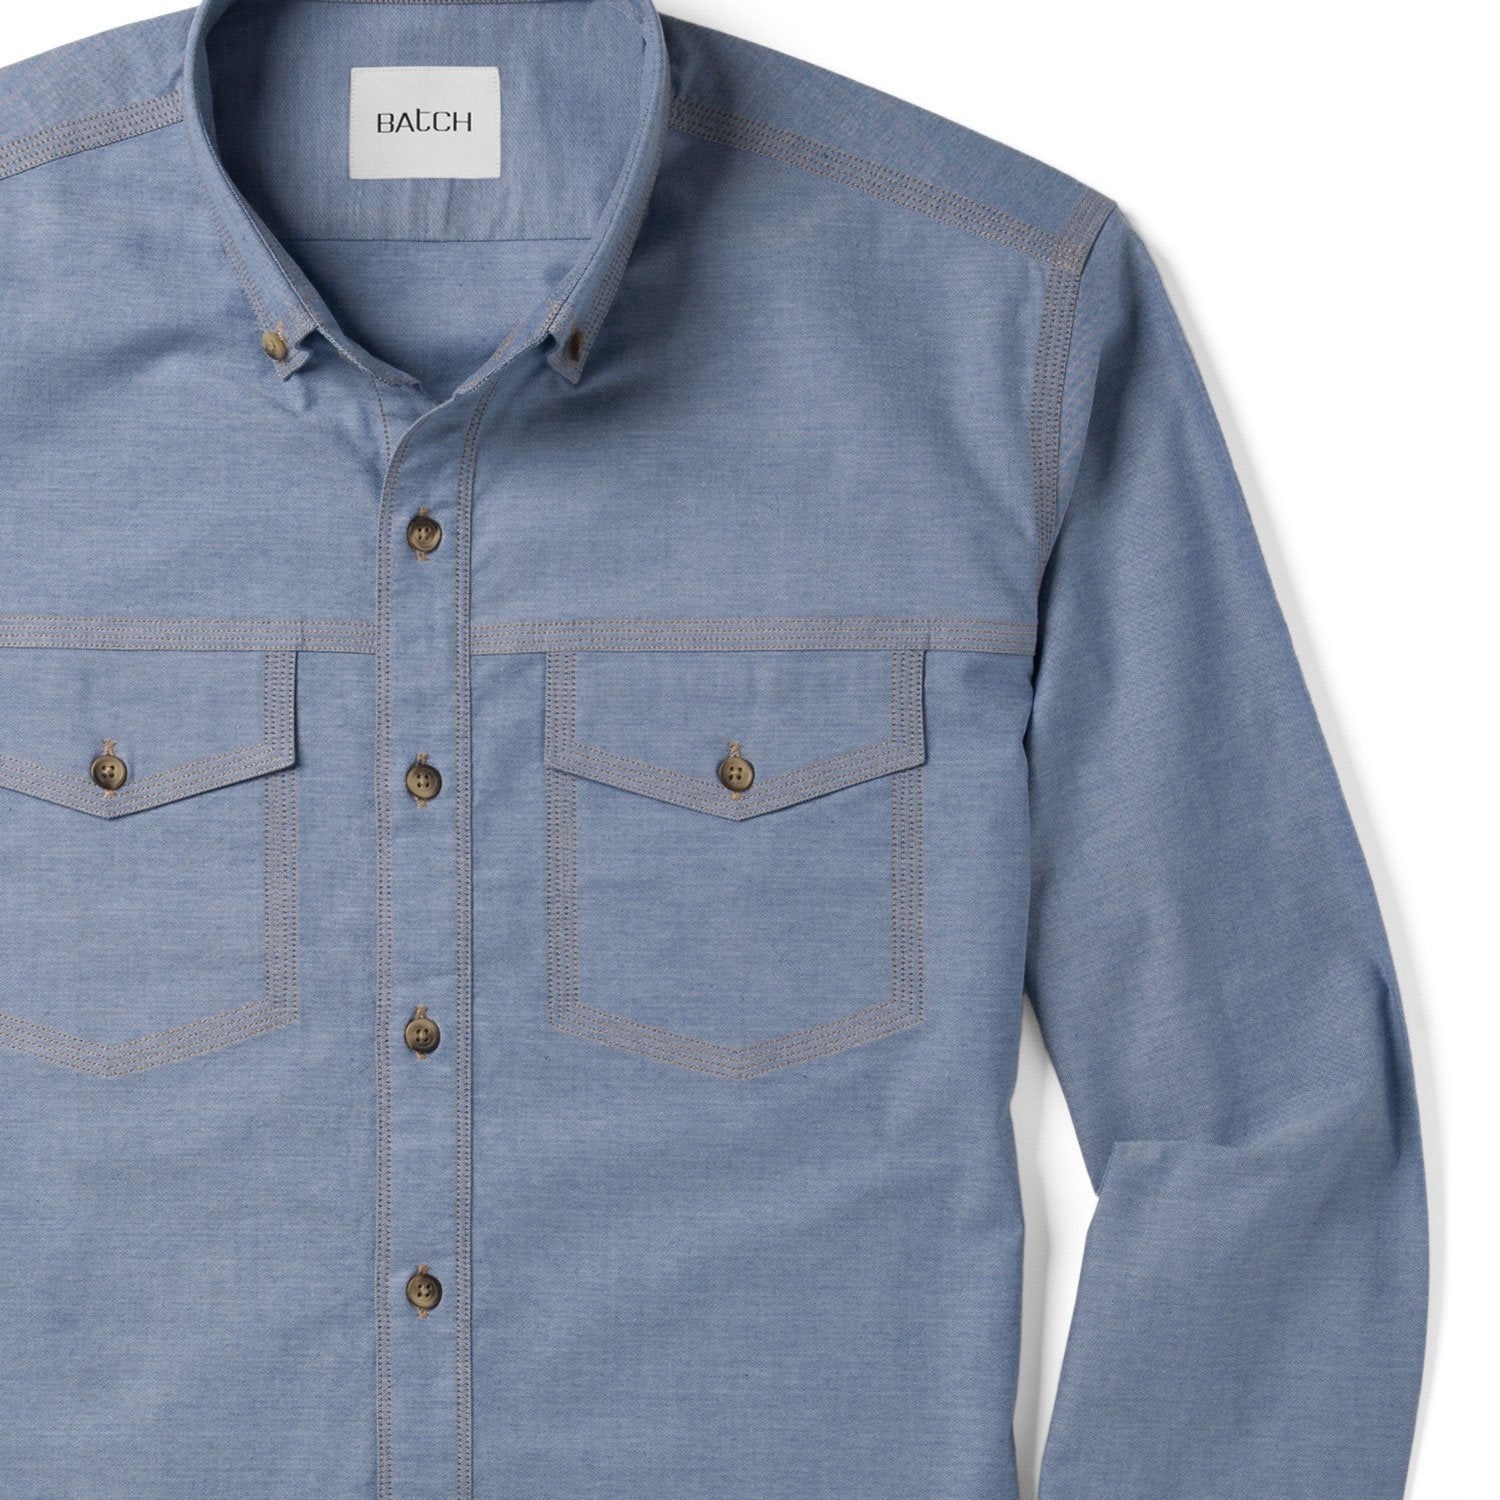 Men's Casual Author Button Up Shirt in Blue Close-Up On Stitching